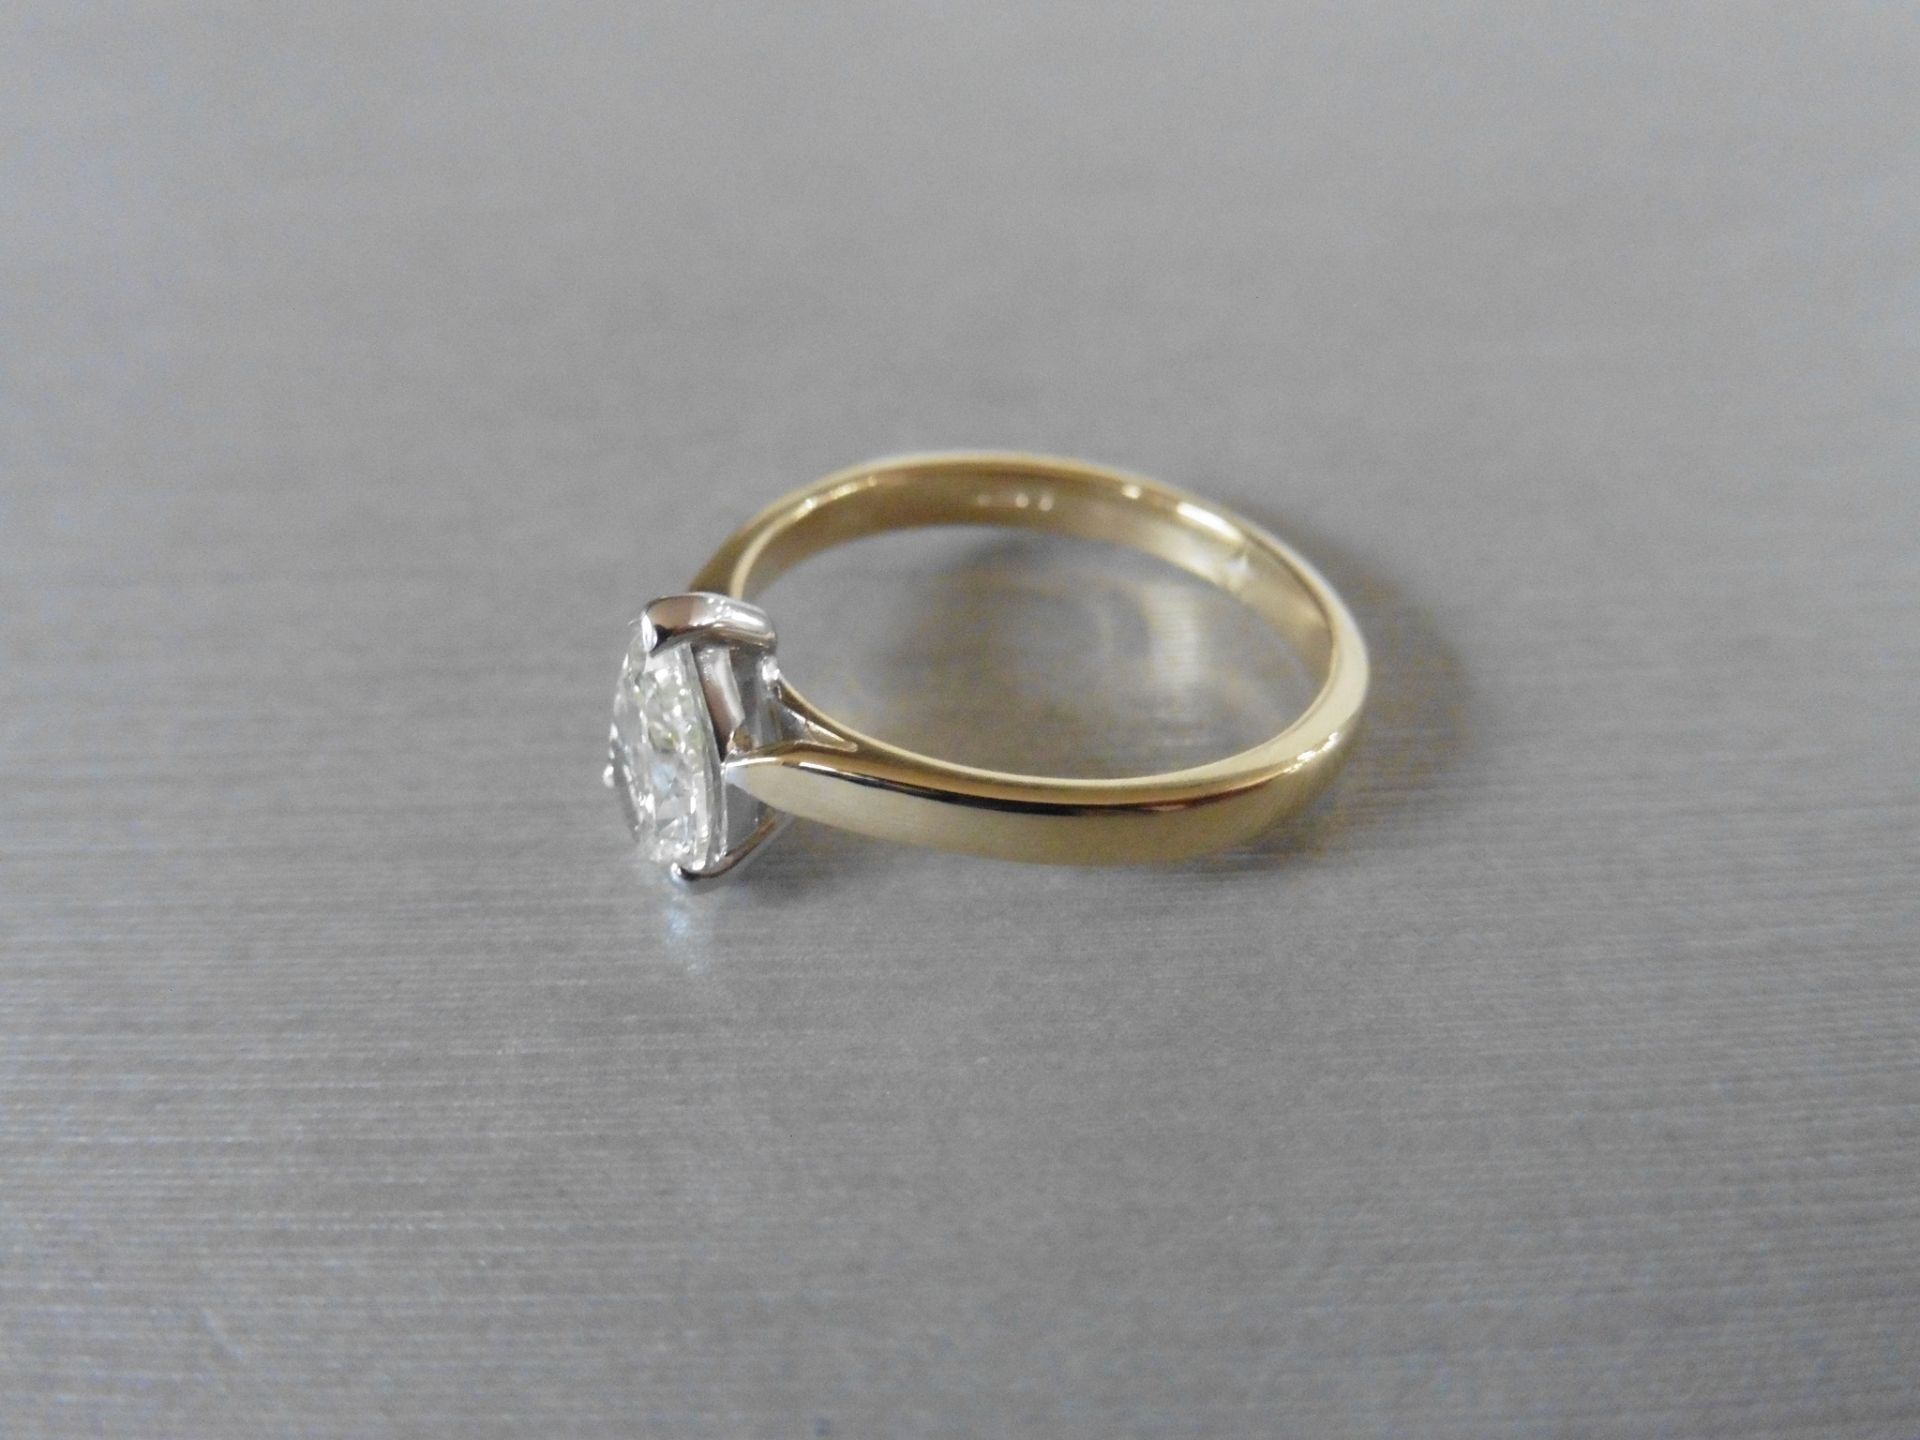 0.81ct pear shaped diamond solitaire ring. J/K colour VS clarity. 3 claw setting in white gold - Image 3 of 4